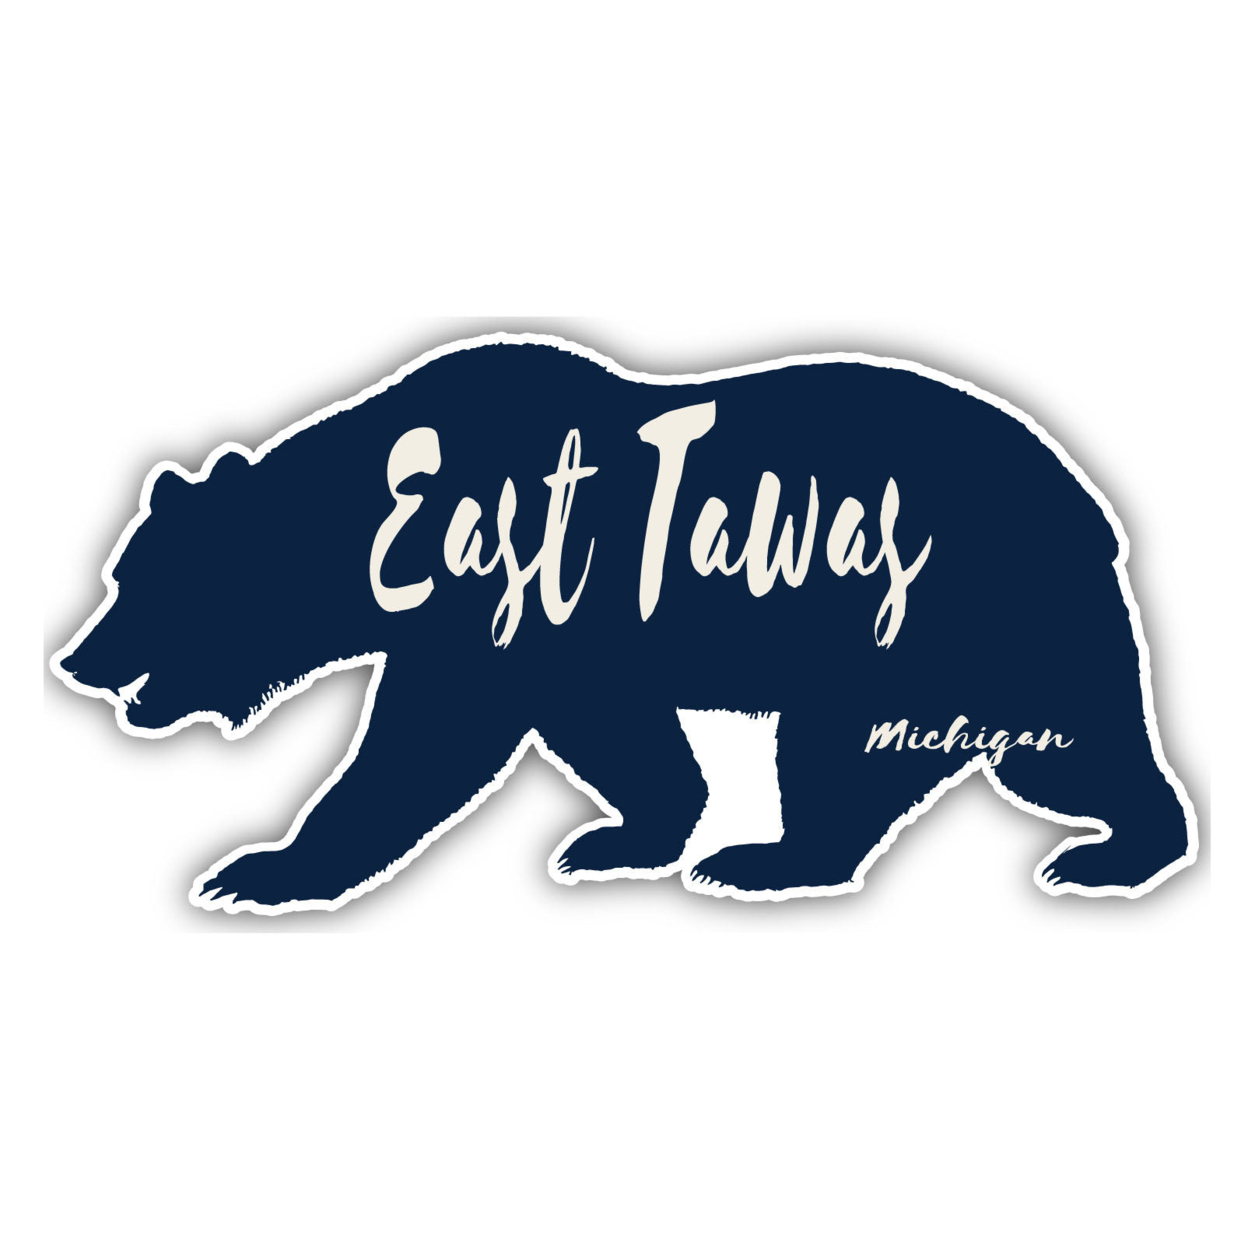 East Tawas Michigan Souvenir Decorative Stickers (Choose Theme And Size) - 4-Pack, 12-Inch, Bear